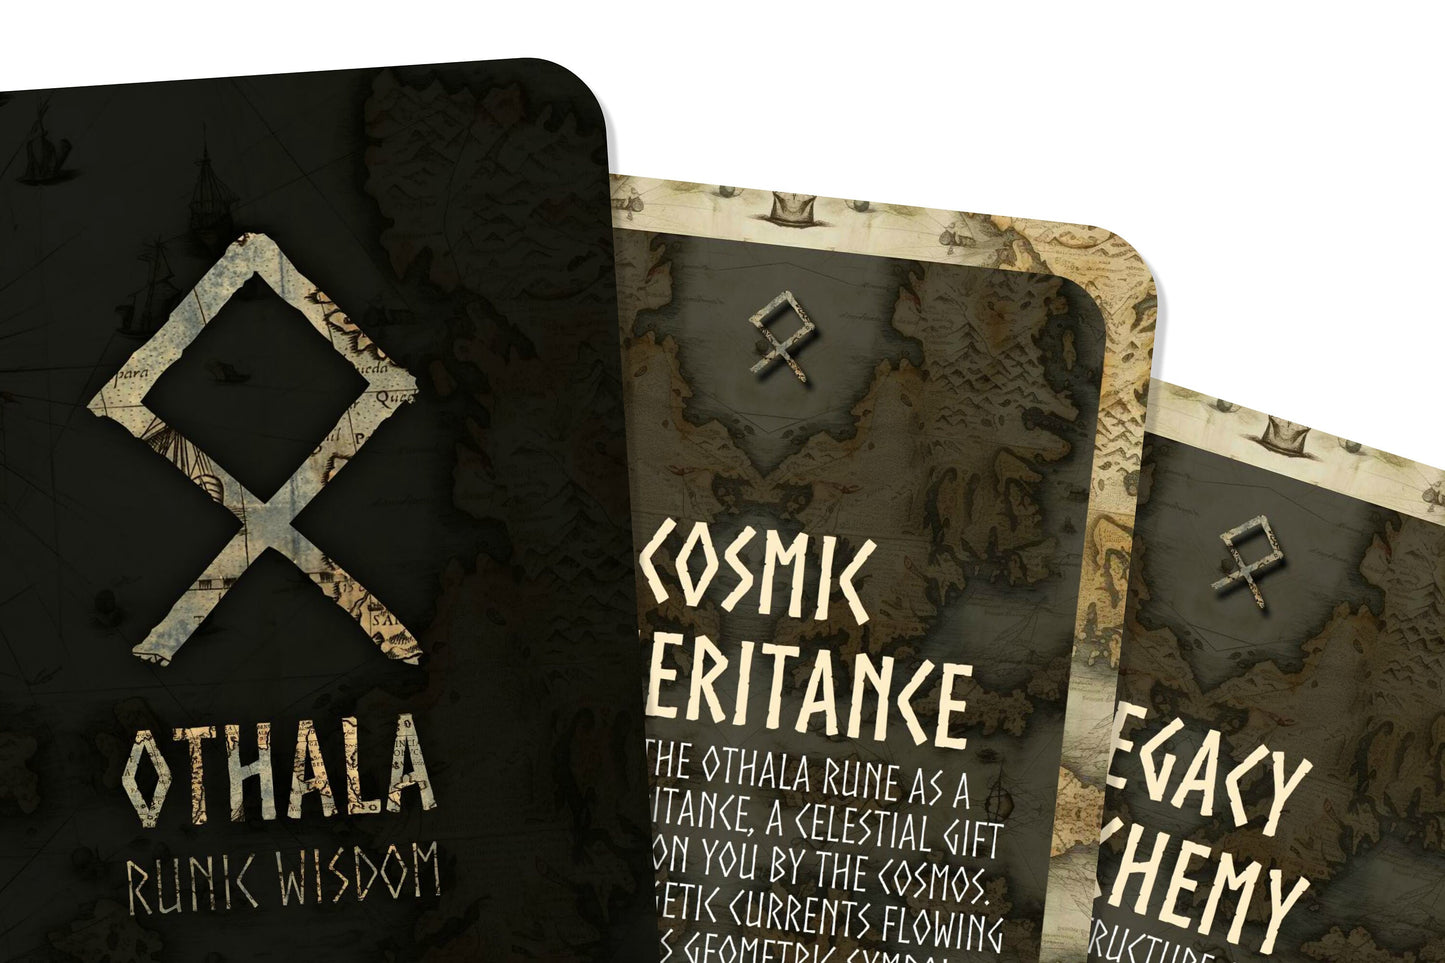 Othala Runic Wisdom - Celestial Runes Series - Divination tools - Oracle Cards - Runes Cards